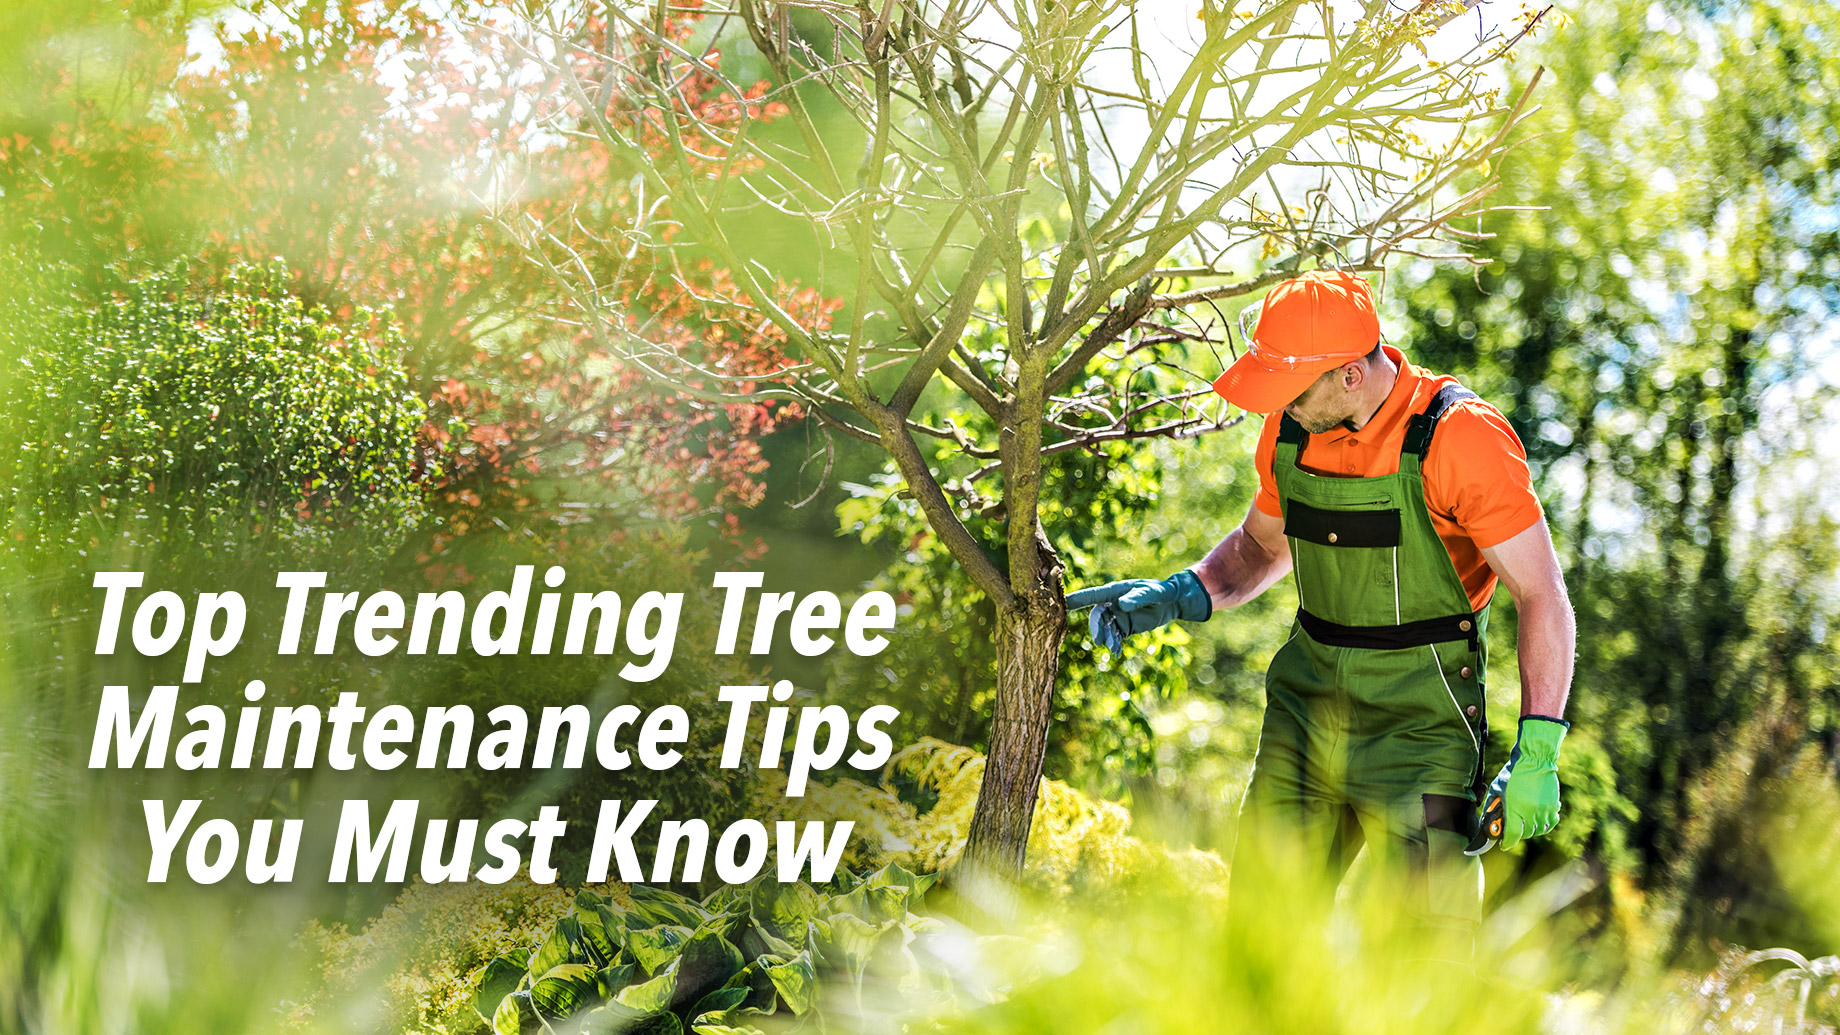 Top Trending Tree Maintenance Tips You Must Know